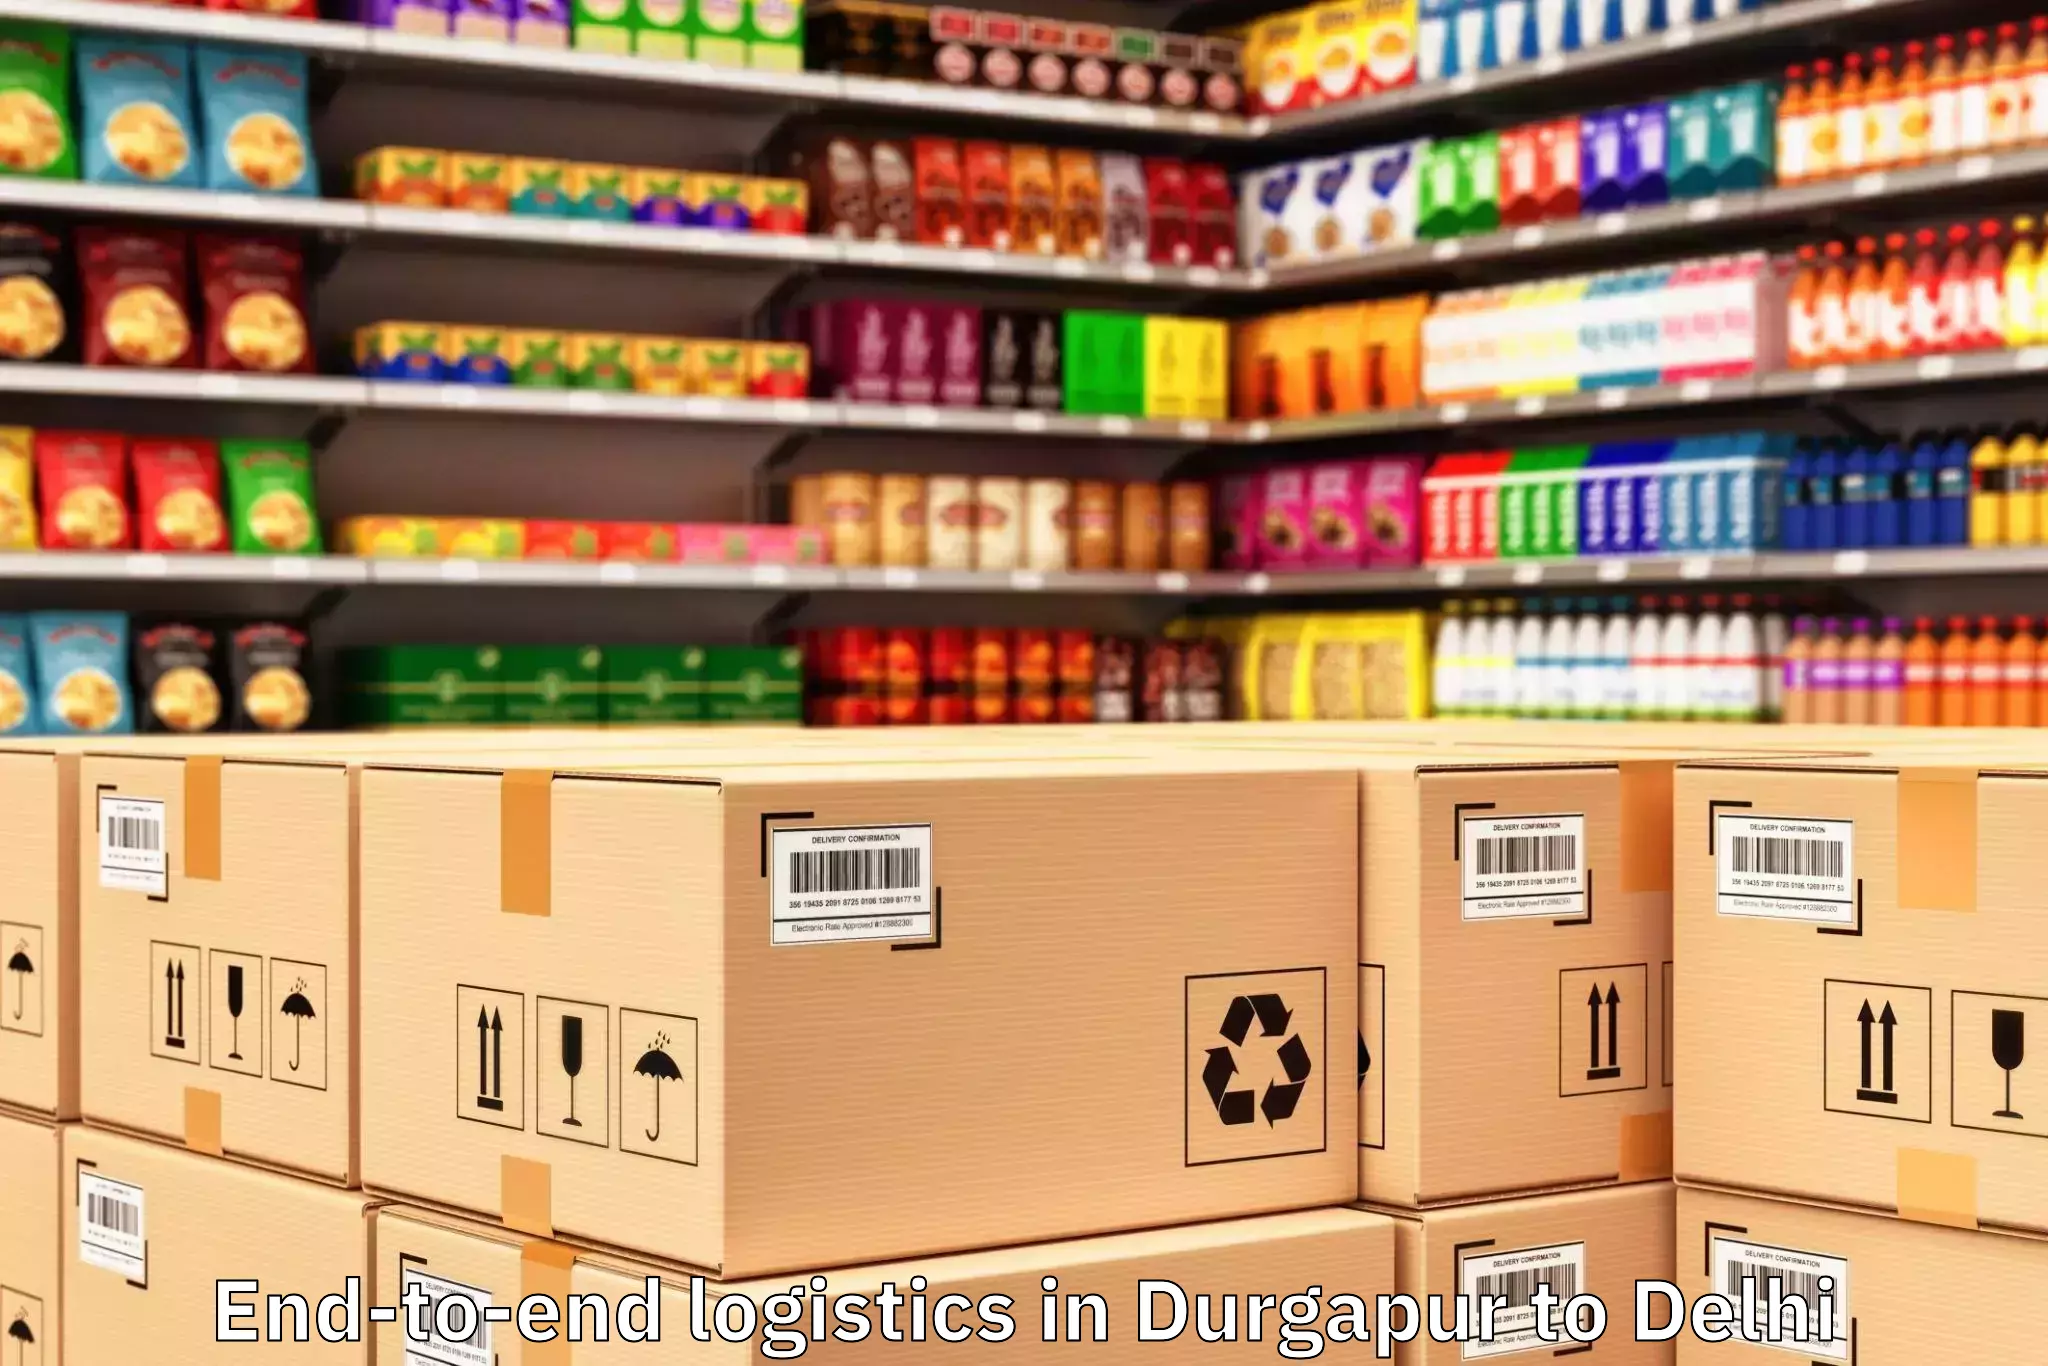 Durgapur to Delhi Pharmaceutical Sciences And Research University New Delhi End To End Logistics Booking